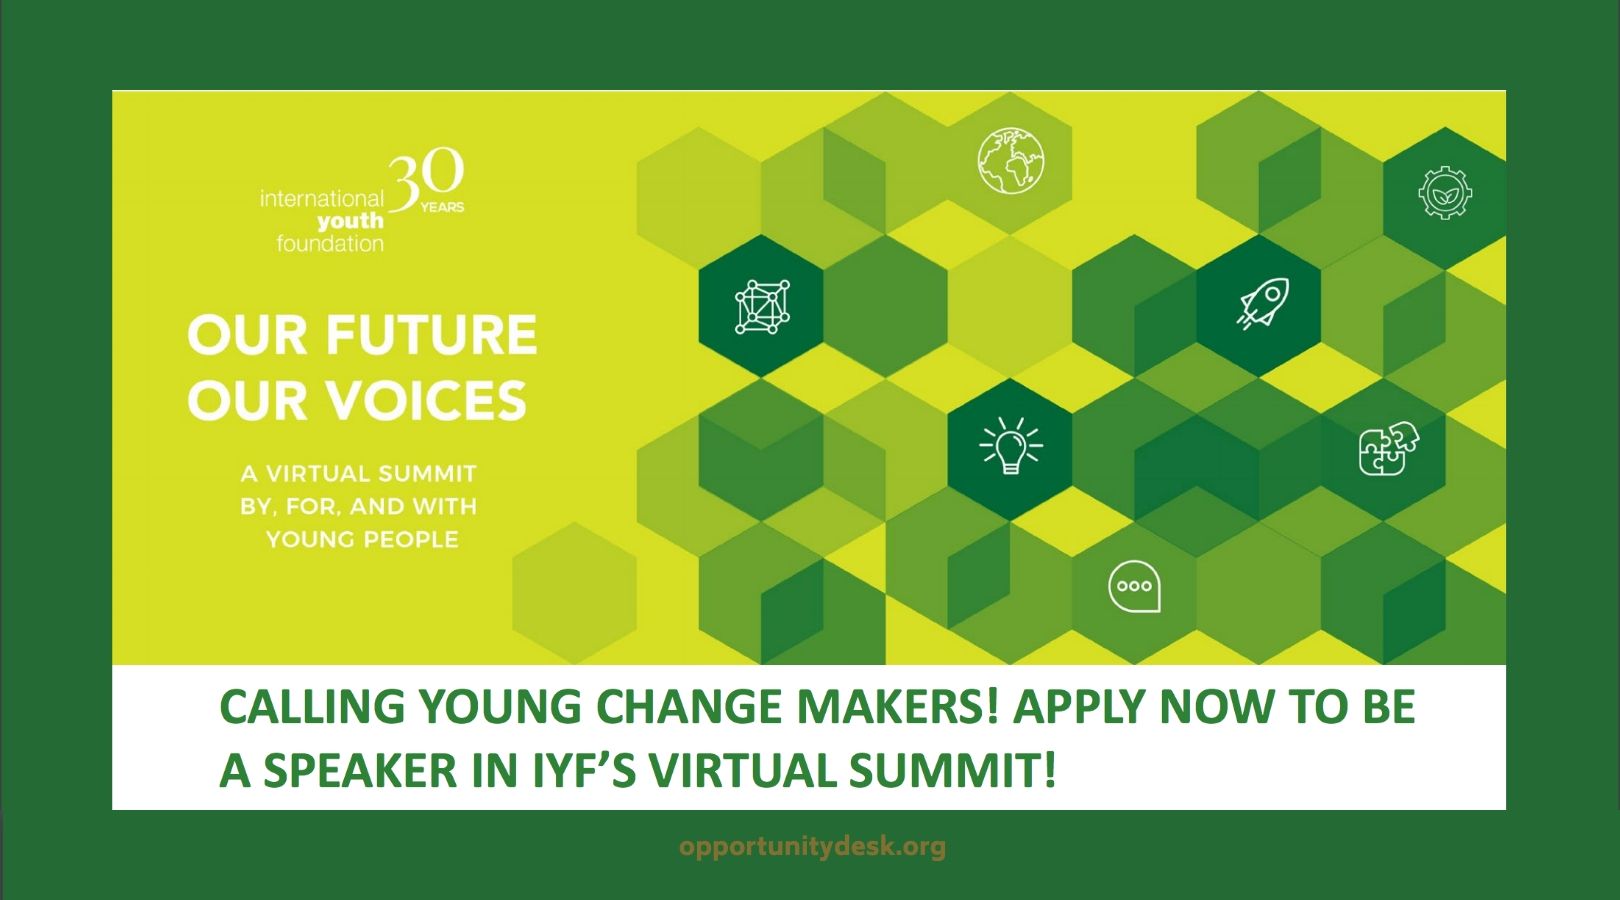 Apply to be a Speaker in International Youth Foundation (IYF)’s “Our Future, Our Voices,” Virtual Summit 2020